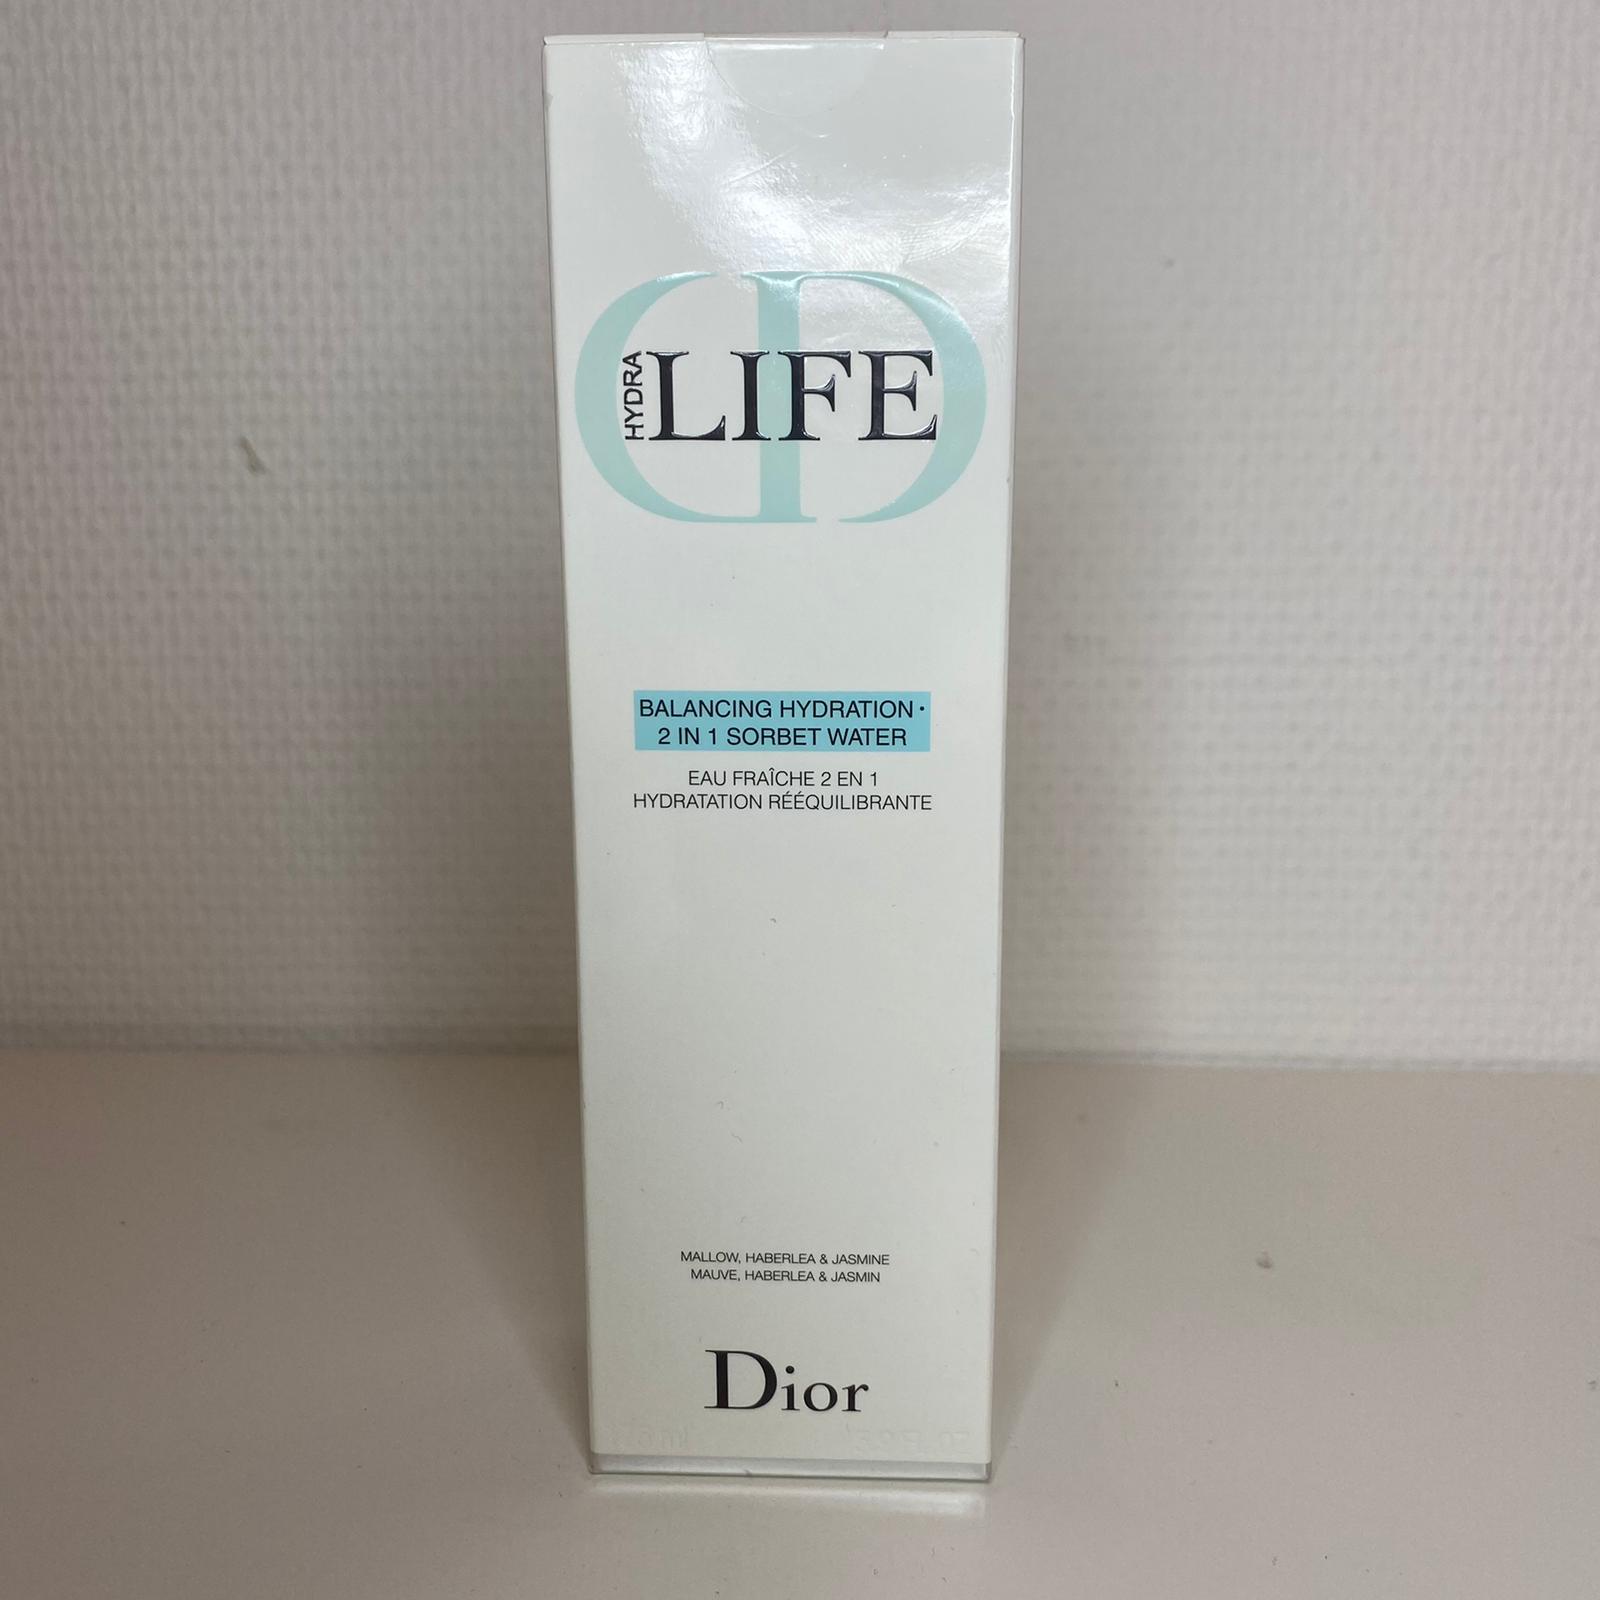 Dior hydra life 2 in 1 sorbet water 175 ml